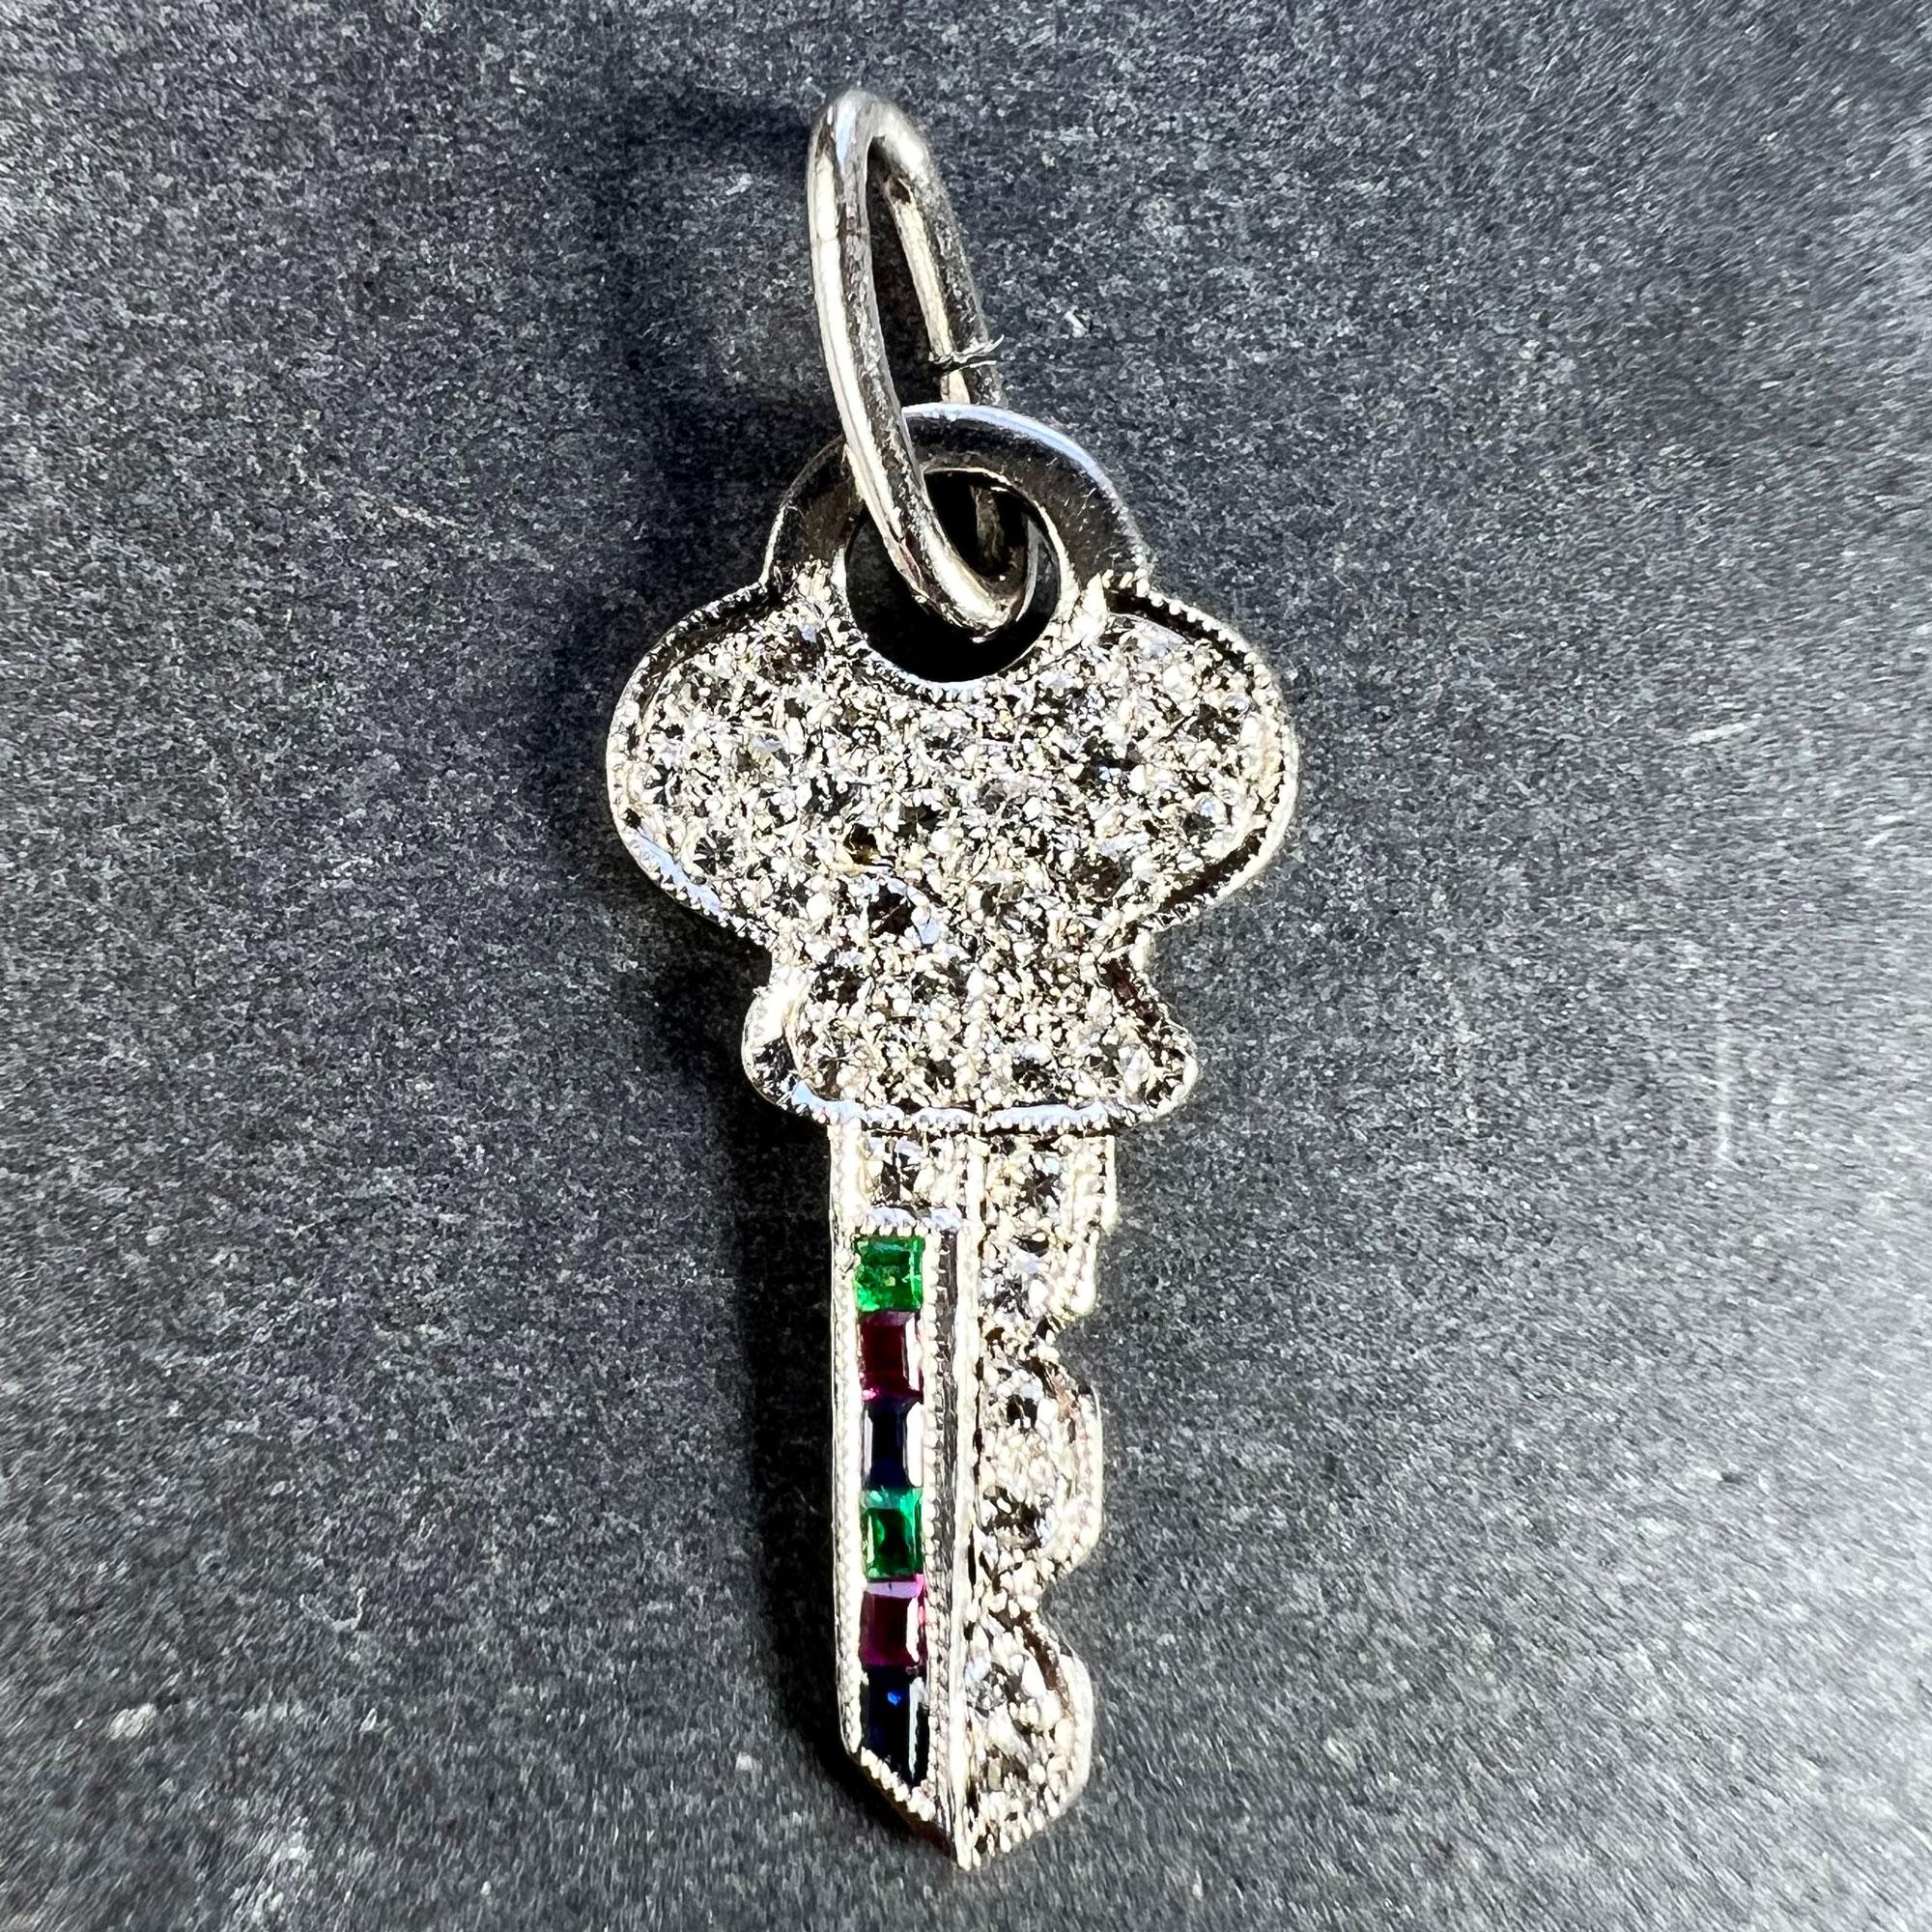 An Art Deco platinum charm pendant designed as a key set with 33 round brilliant cut diamonds with a total estimated weight of 0.50 carats, 2 step cut emeralds with a total estimated weight of 0.04 carats, 2 step cut rubies with a total estimated